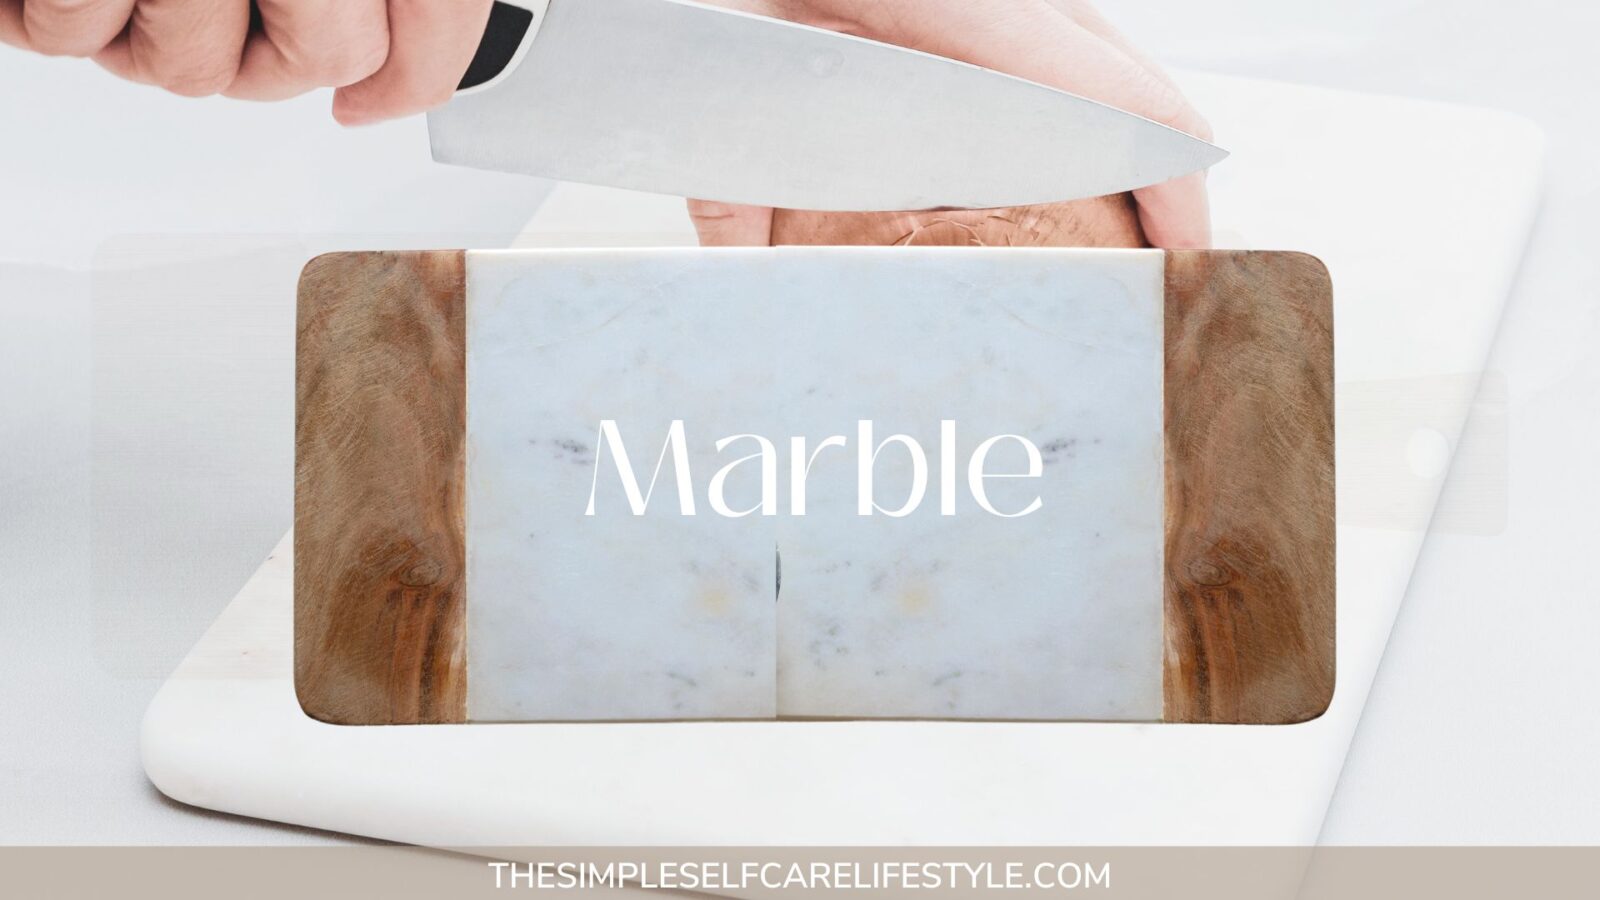 https://thesimpleselfcarelifestyle.com/wp-content/uploads/2023/08/Marble-Cutting-Board-Non-Toxic-Hygenic.-The-Simple-Self-Care-Lifestyle-1600x900.jpg